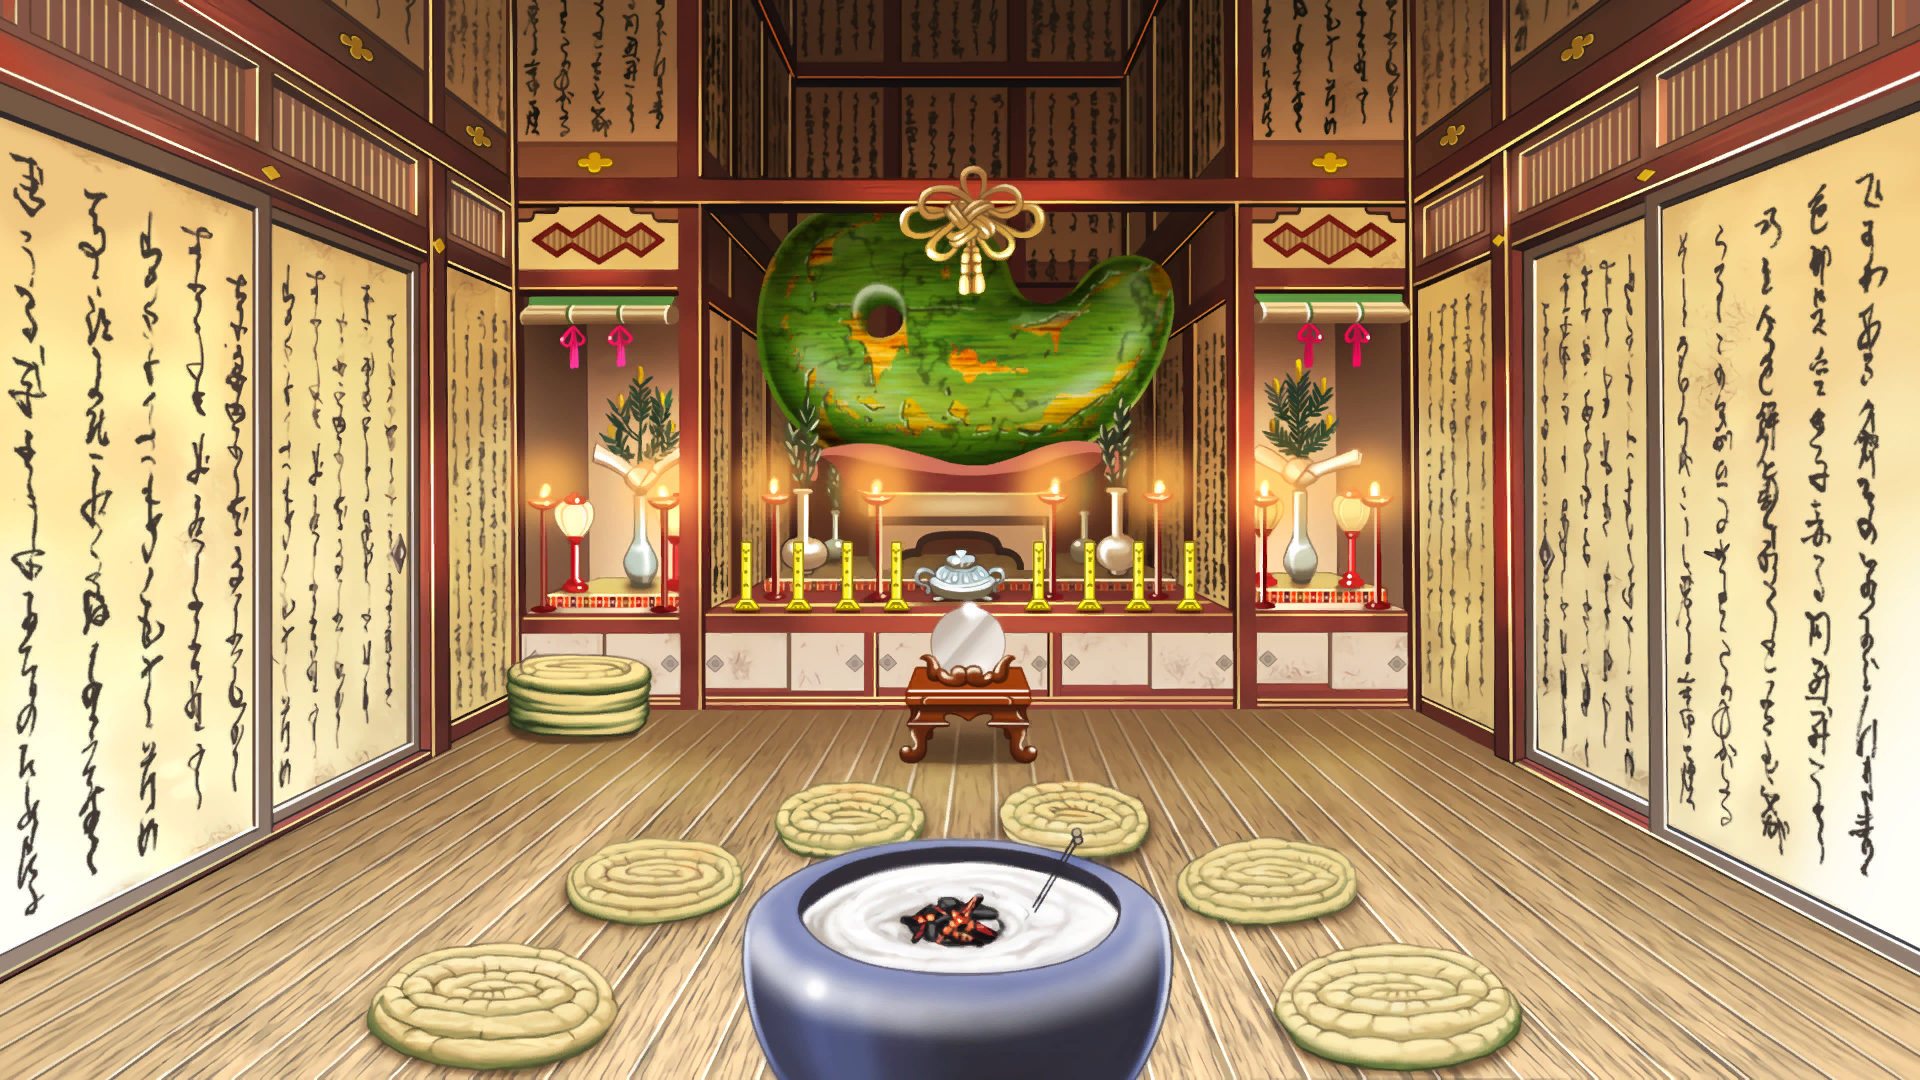 http://images3.wikia.nocookie.net/__cb20100906234119/aceattorney/images/6/67/Temple_Hall.png